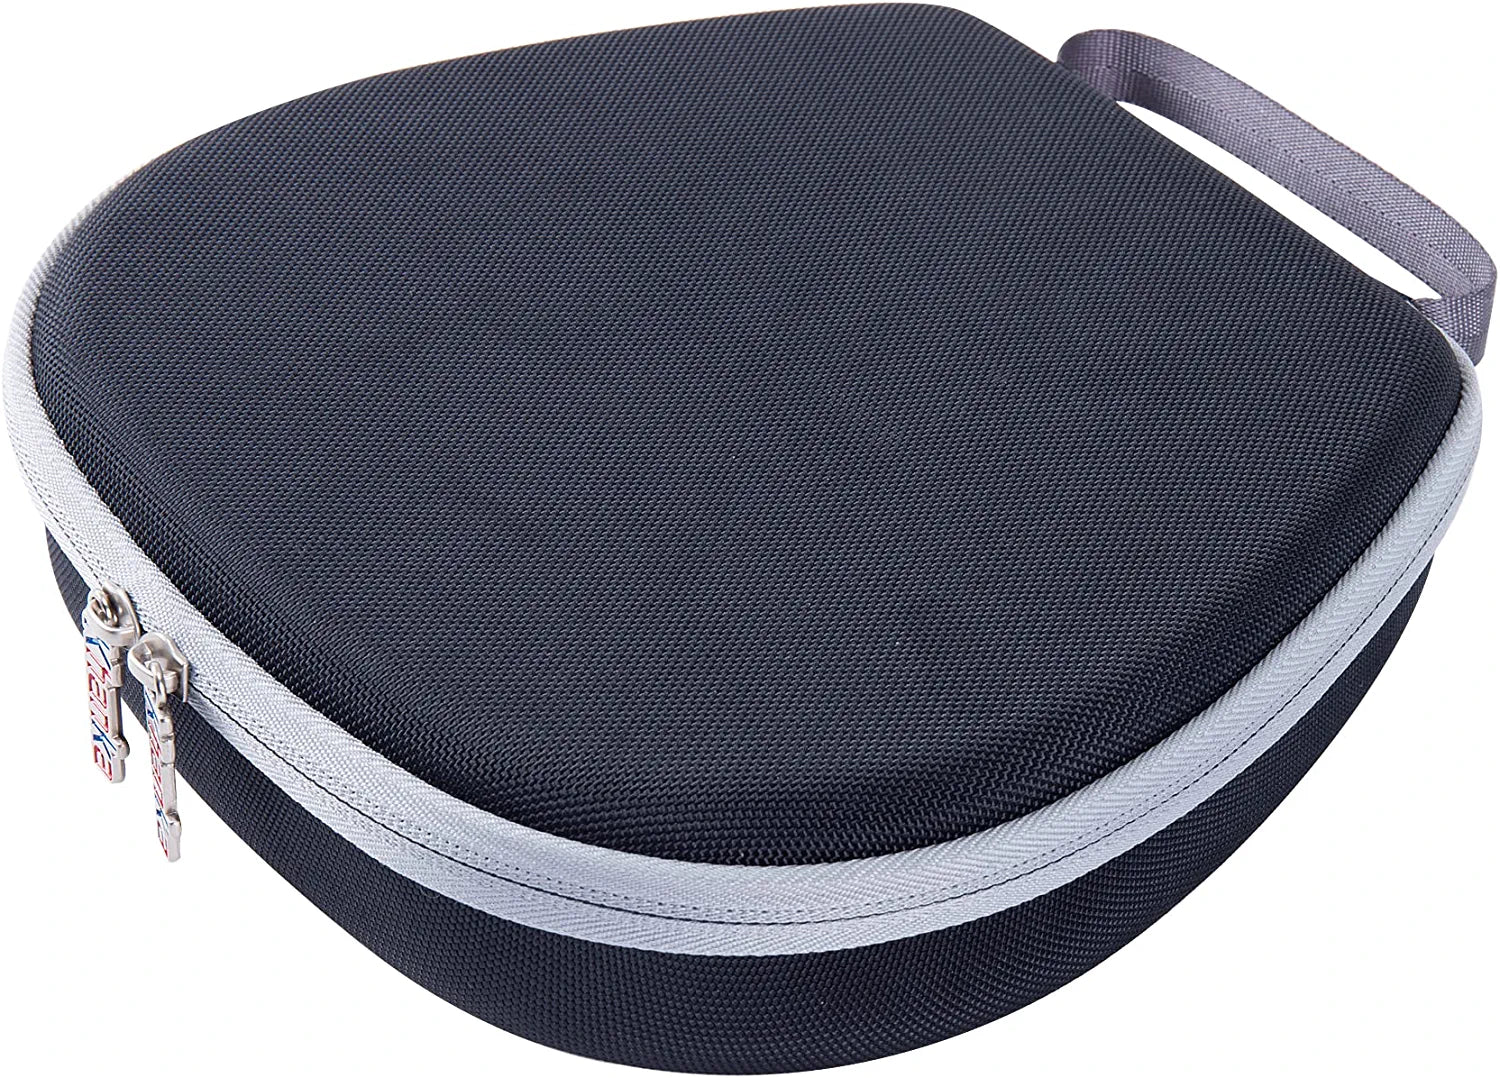 Hard Carrying Case Replacement for Sony SRS-NS7 Wireless Neckband Bluetooth Speaker, Case Only